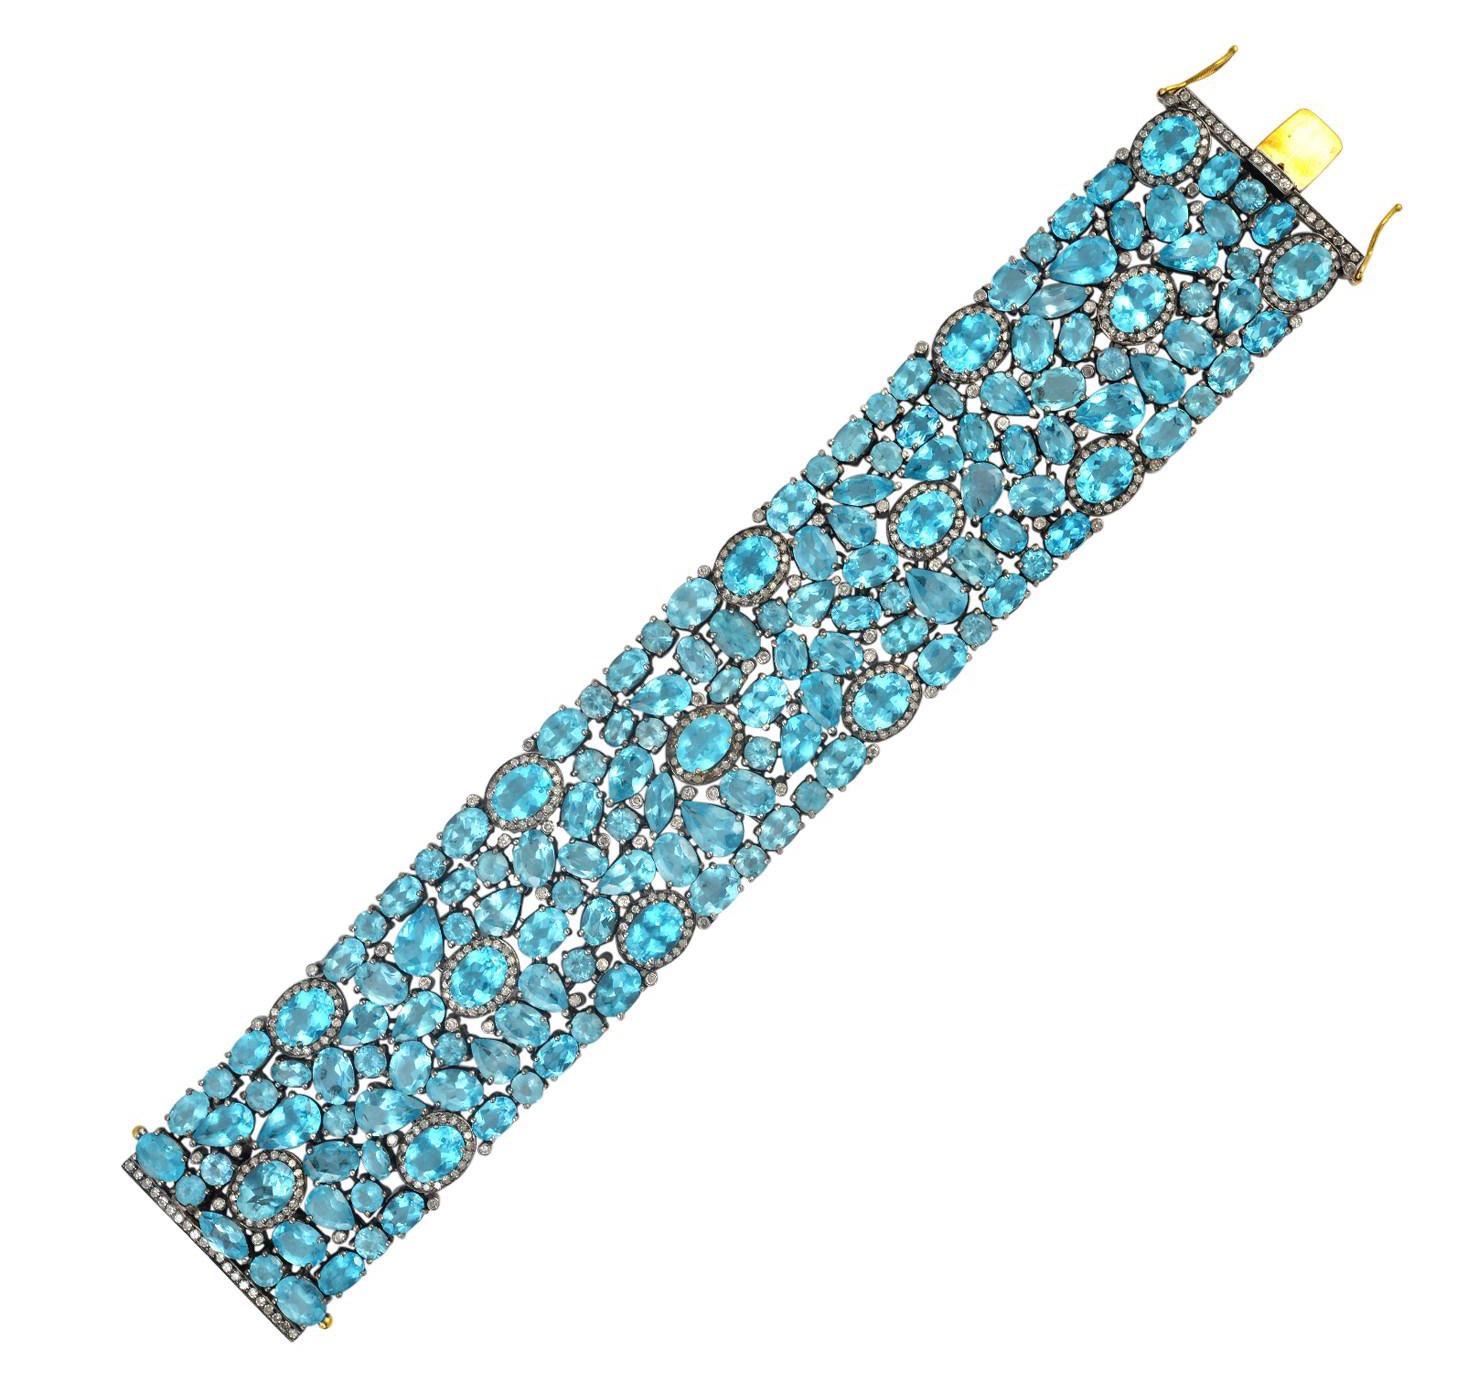 A stunning bracelet handmade in 18K gold and sterling silver. It is set in 95.1 carats  apatite and 2.95 carats diamonds. Pair this with your favorite evening dress for a red carpet look. Clasp Closure

FOLLOW  MEGHNA JEWELS storefront to view the